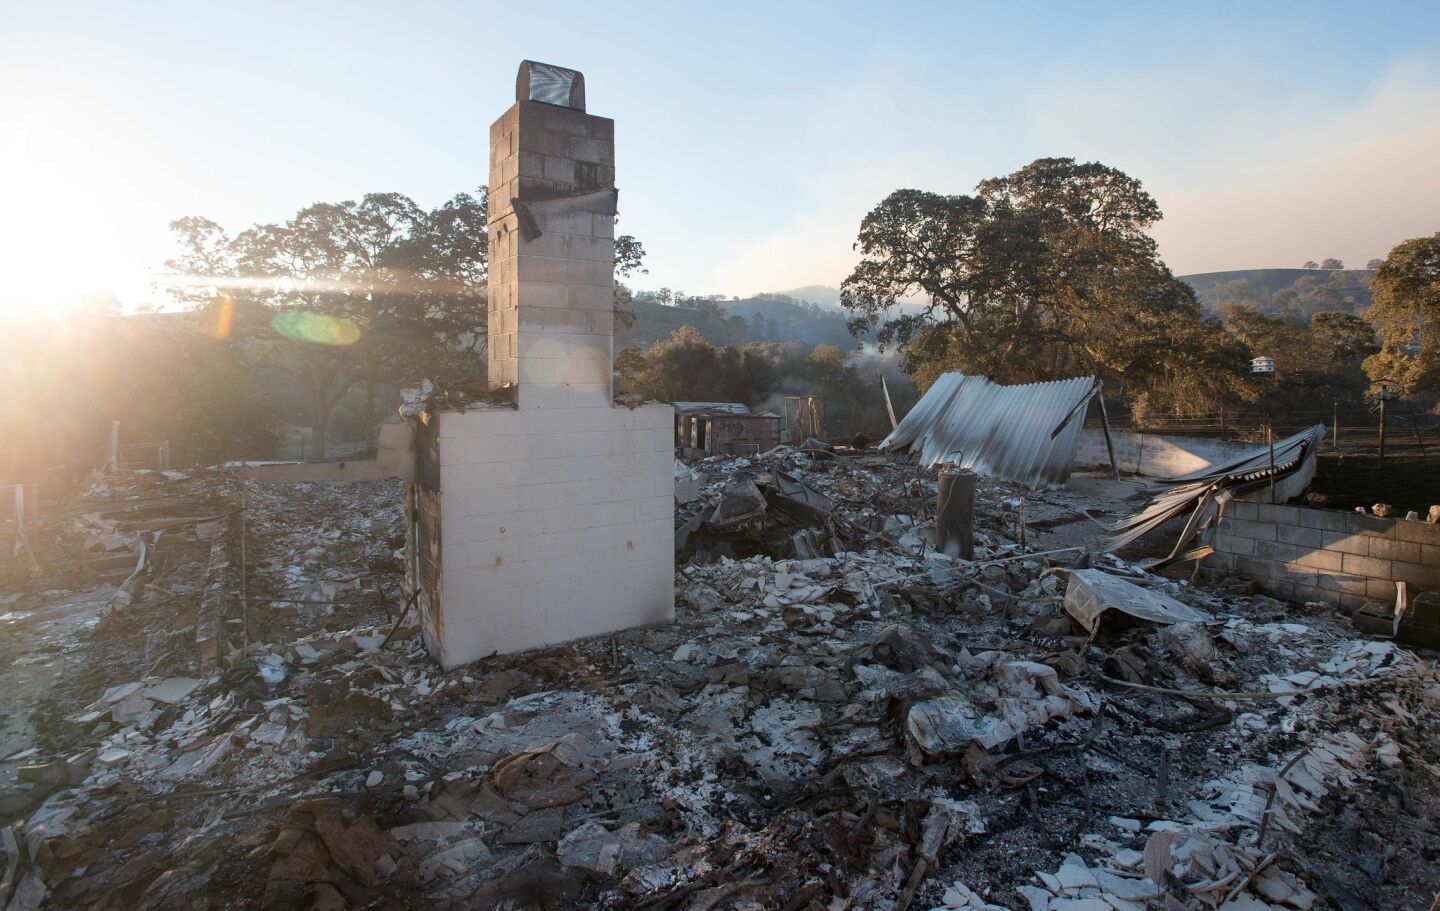 A chimney stands amid the burned-out remains of a house on July 18 near Mariposa.